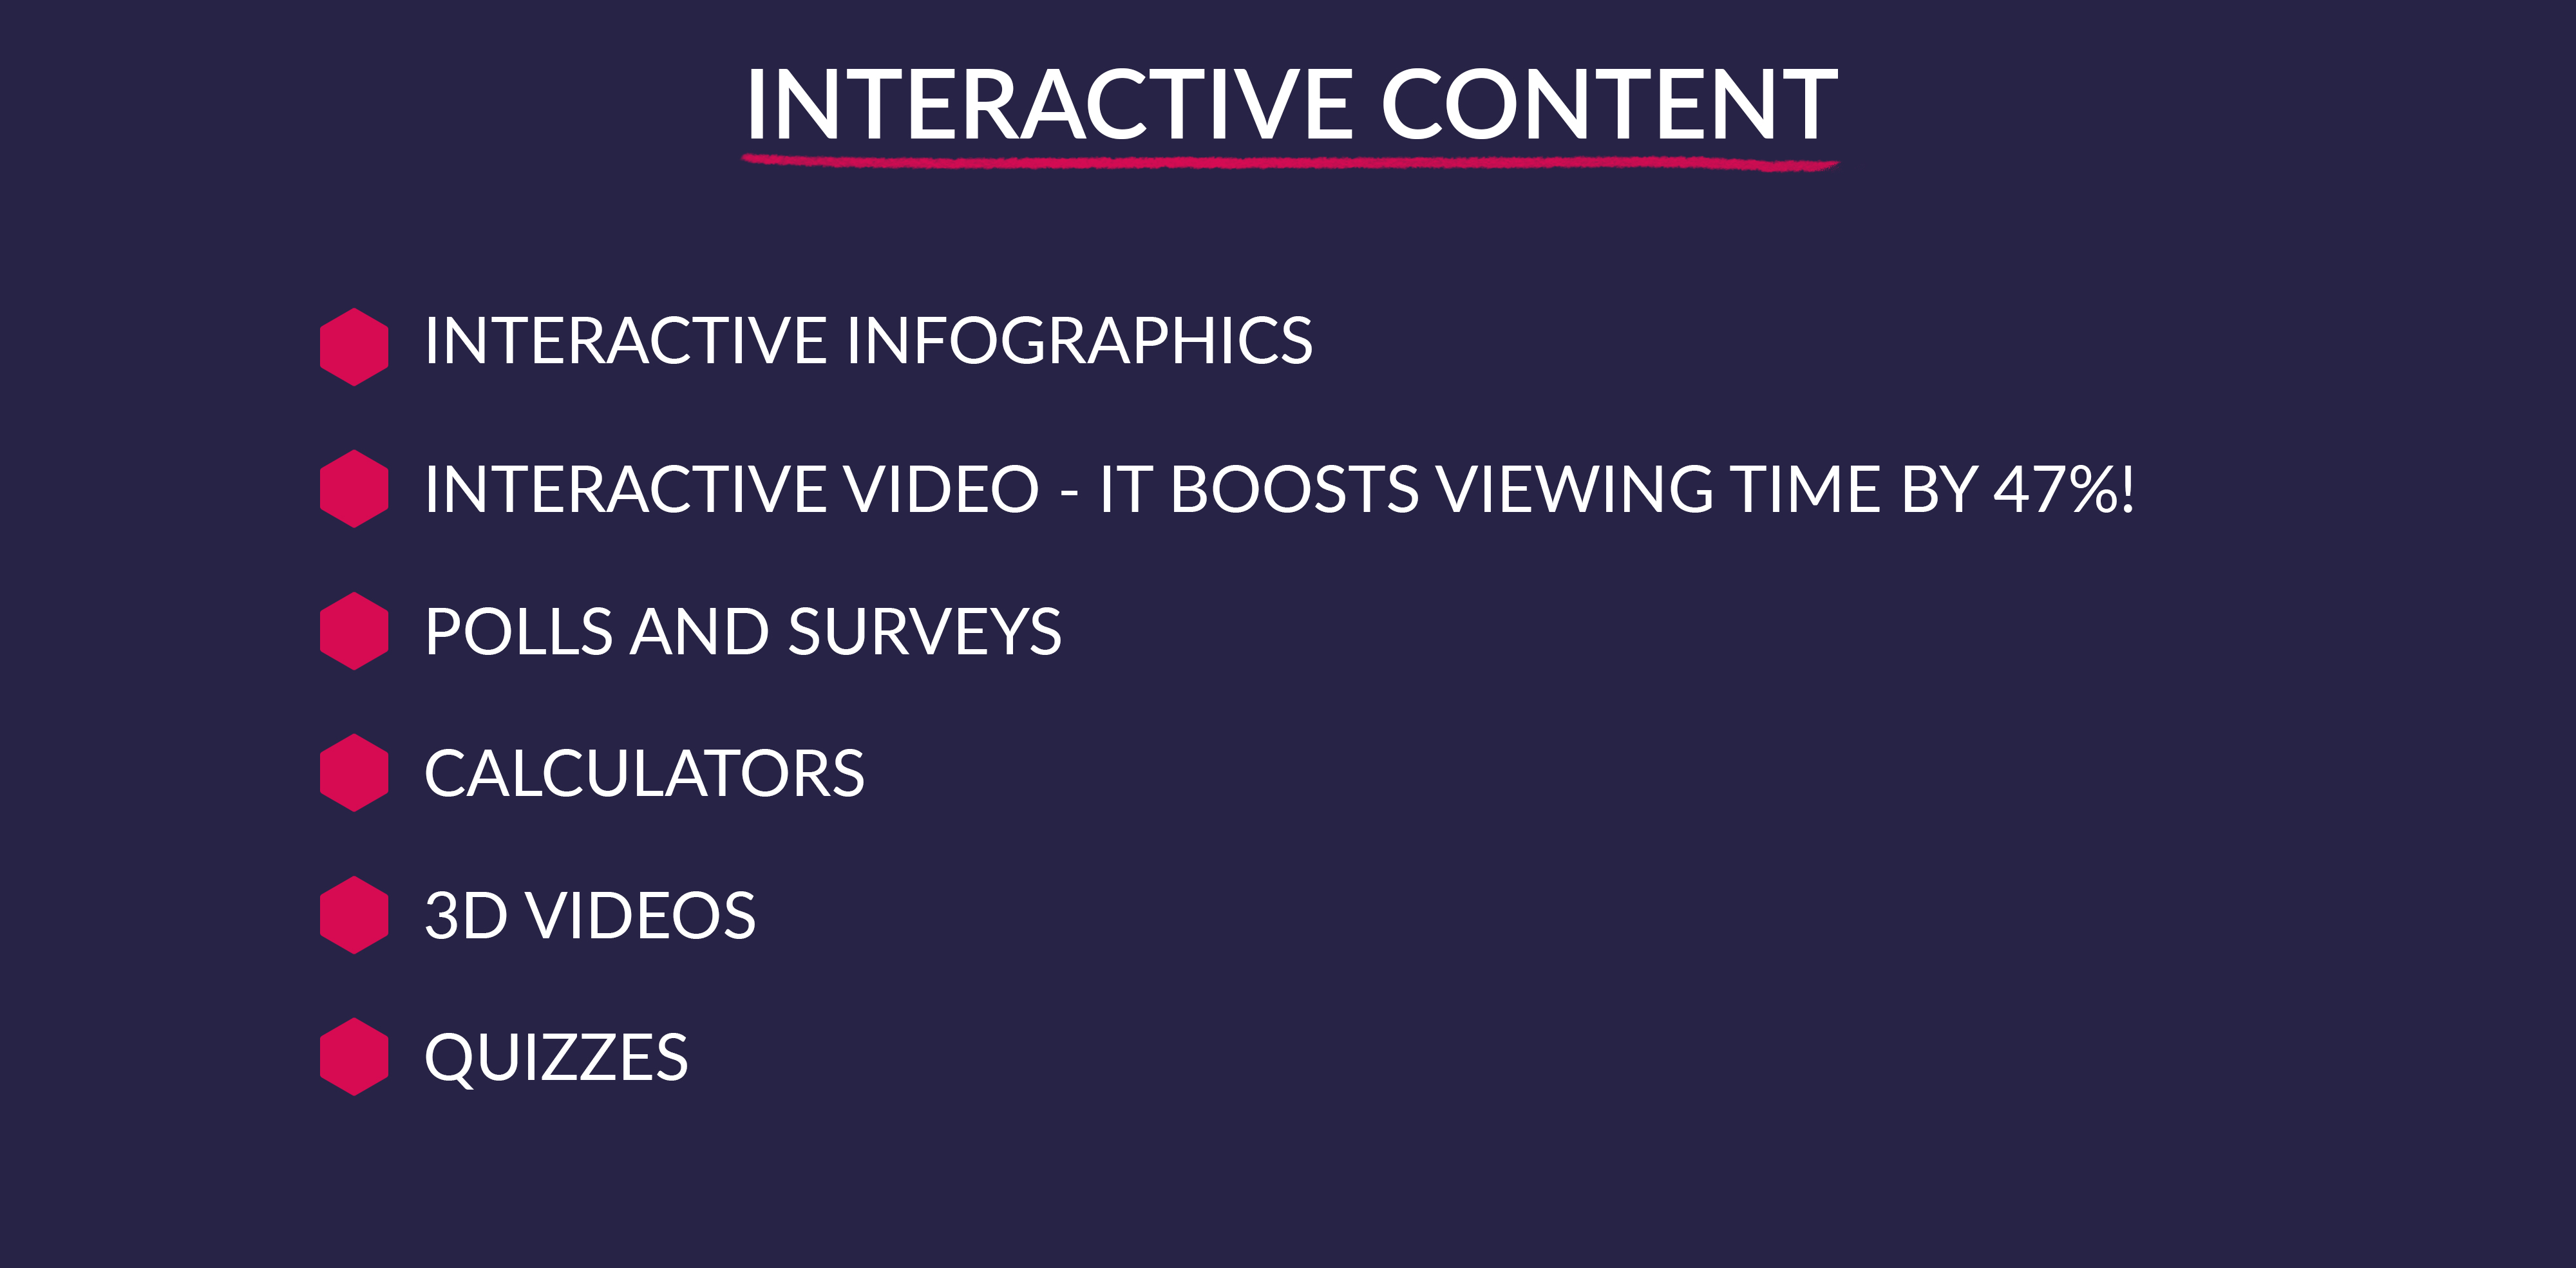 Provide customers with interactiv